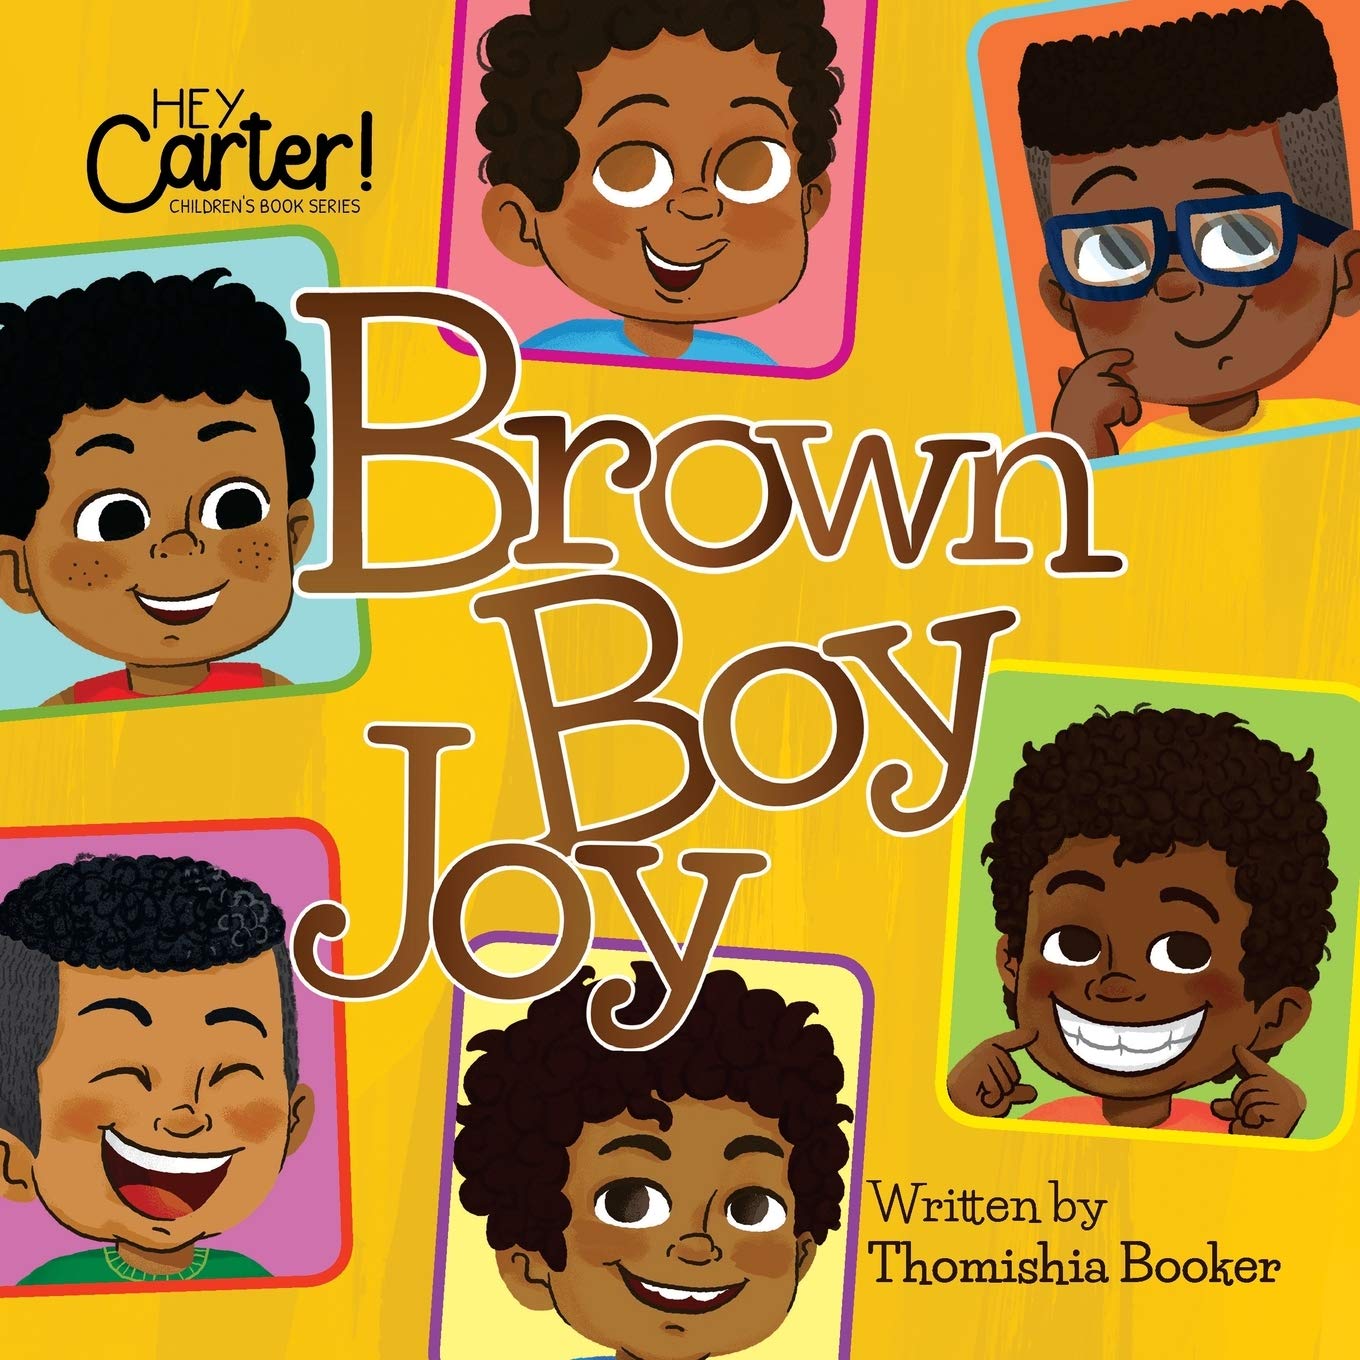 Recommended Reads: 8 Children’s Books by Black Authors